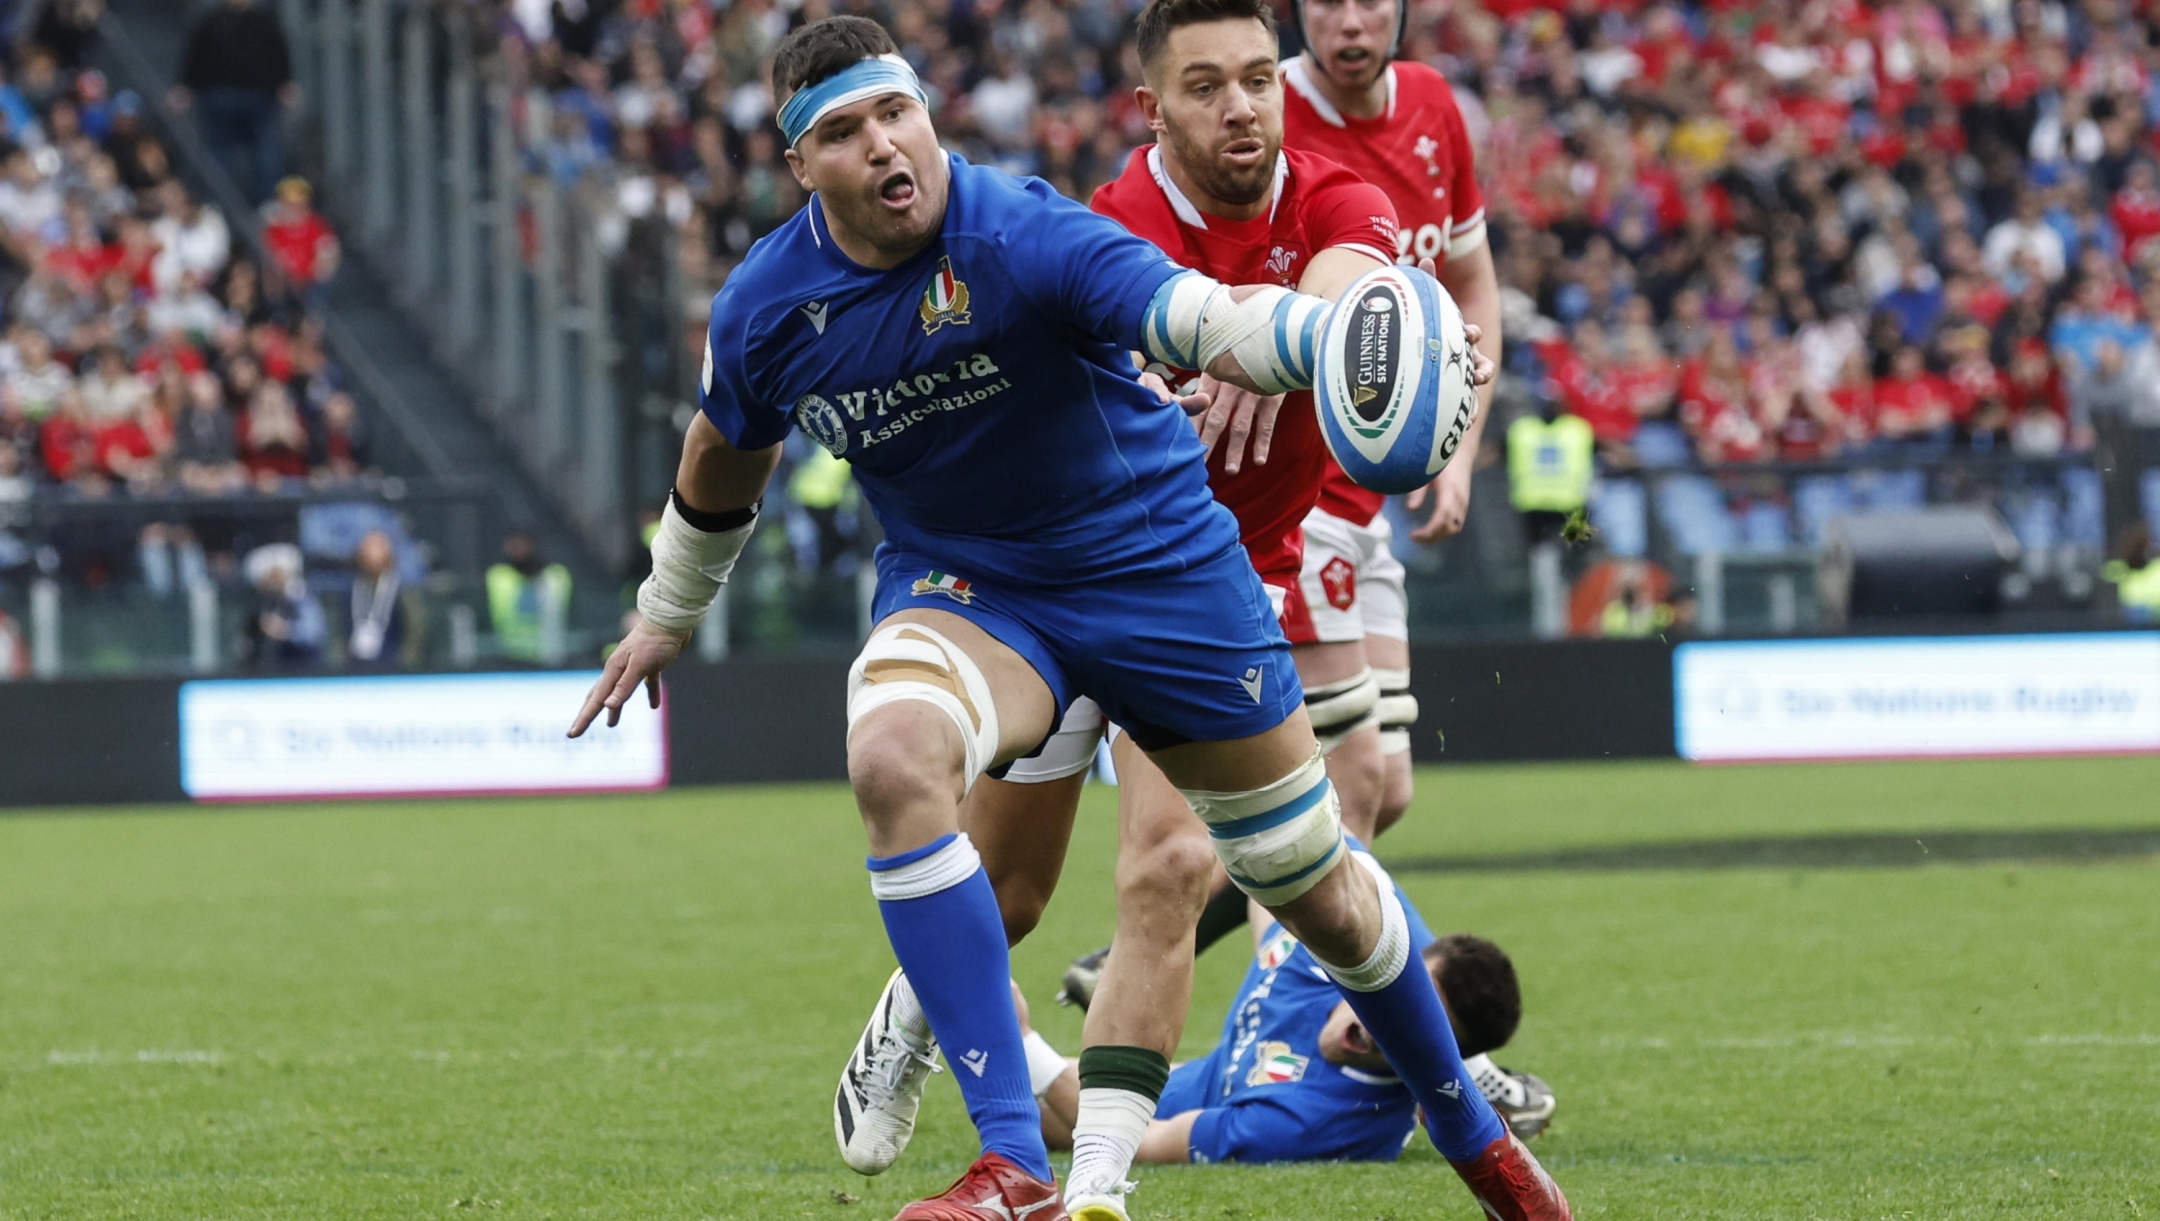 Italy's Sebastian Negri during the Six Nations Rugby match Italy vs Walles at Olimpico stadium in Rome, Italy, 11 March 2023.
ANSA/FABIO FRUSTACI